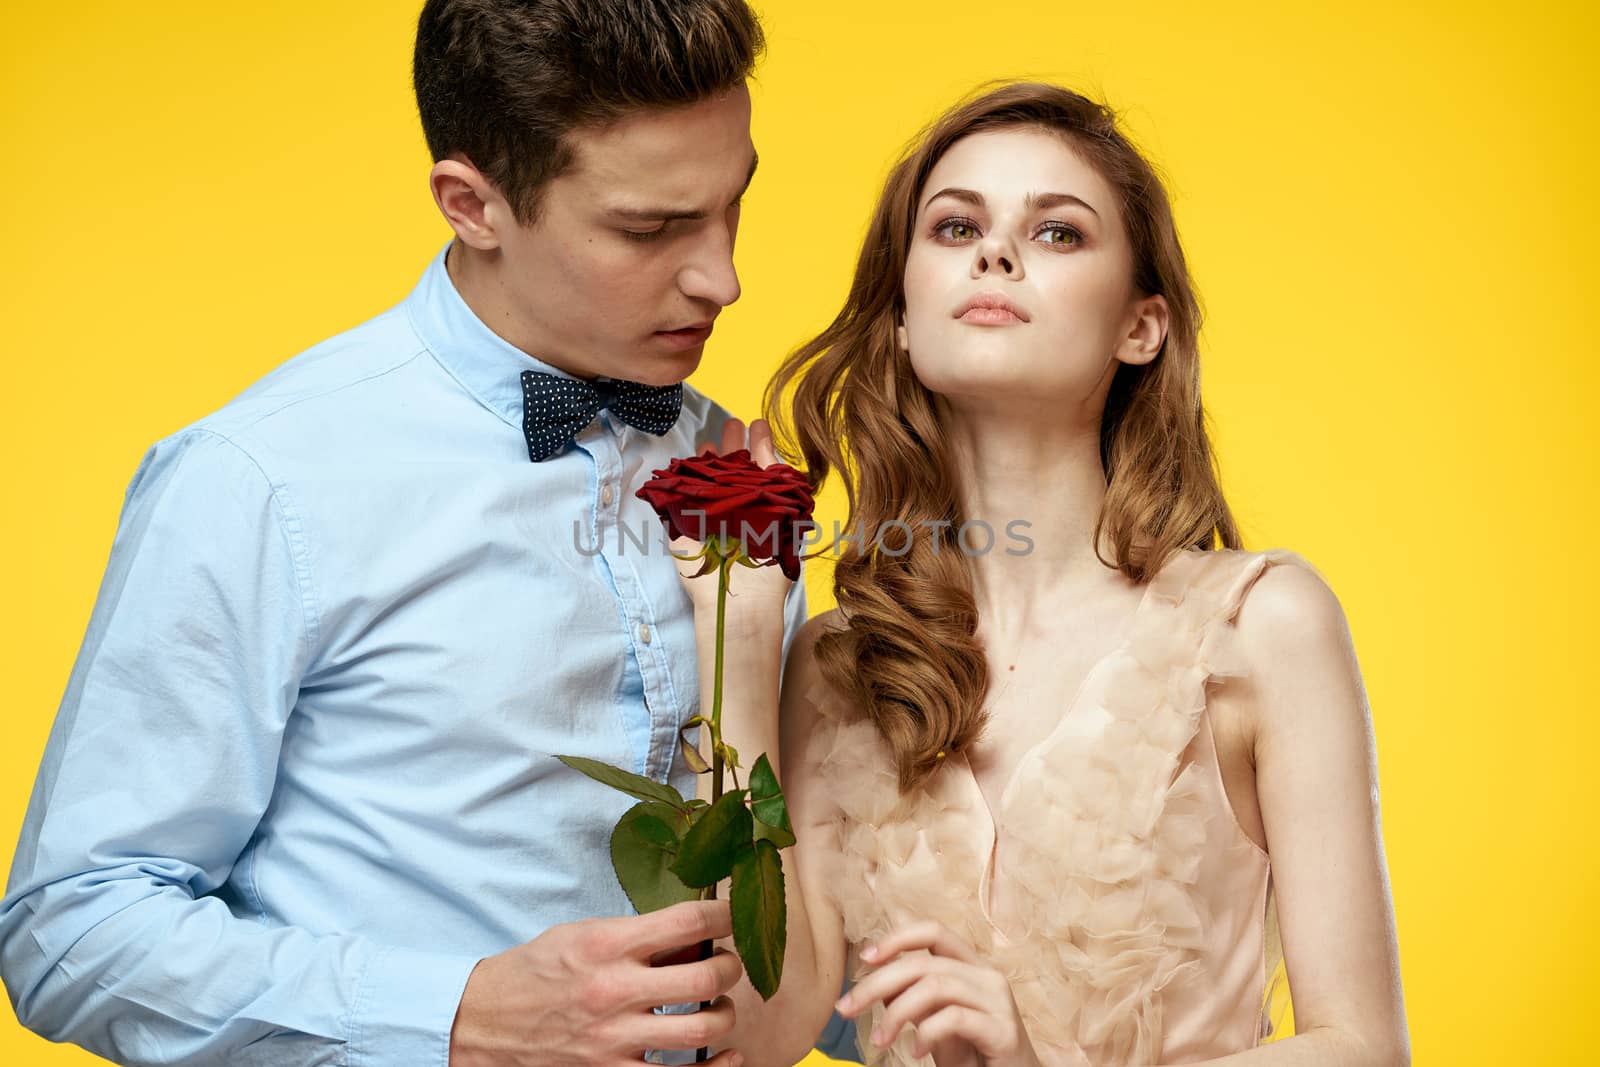 Enamored man and woman with red rose on yellow background cropped view close-up romance. High quality photo